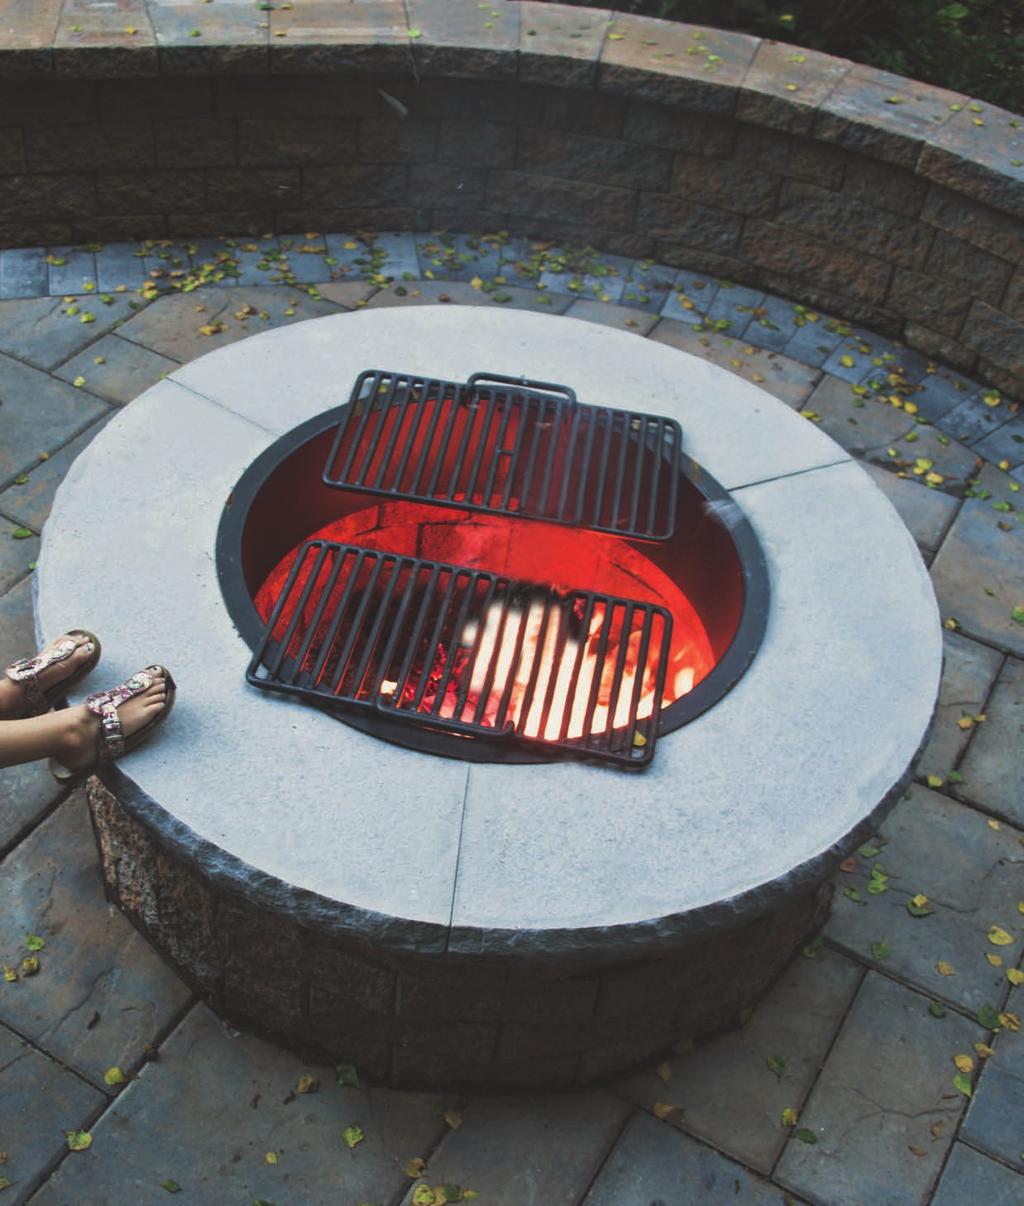 serafina Fire Pit There is something magical